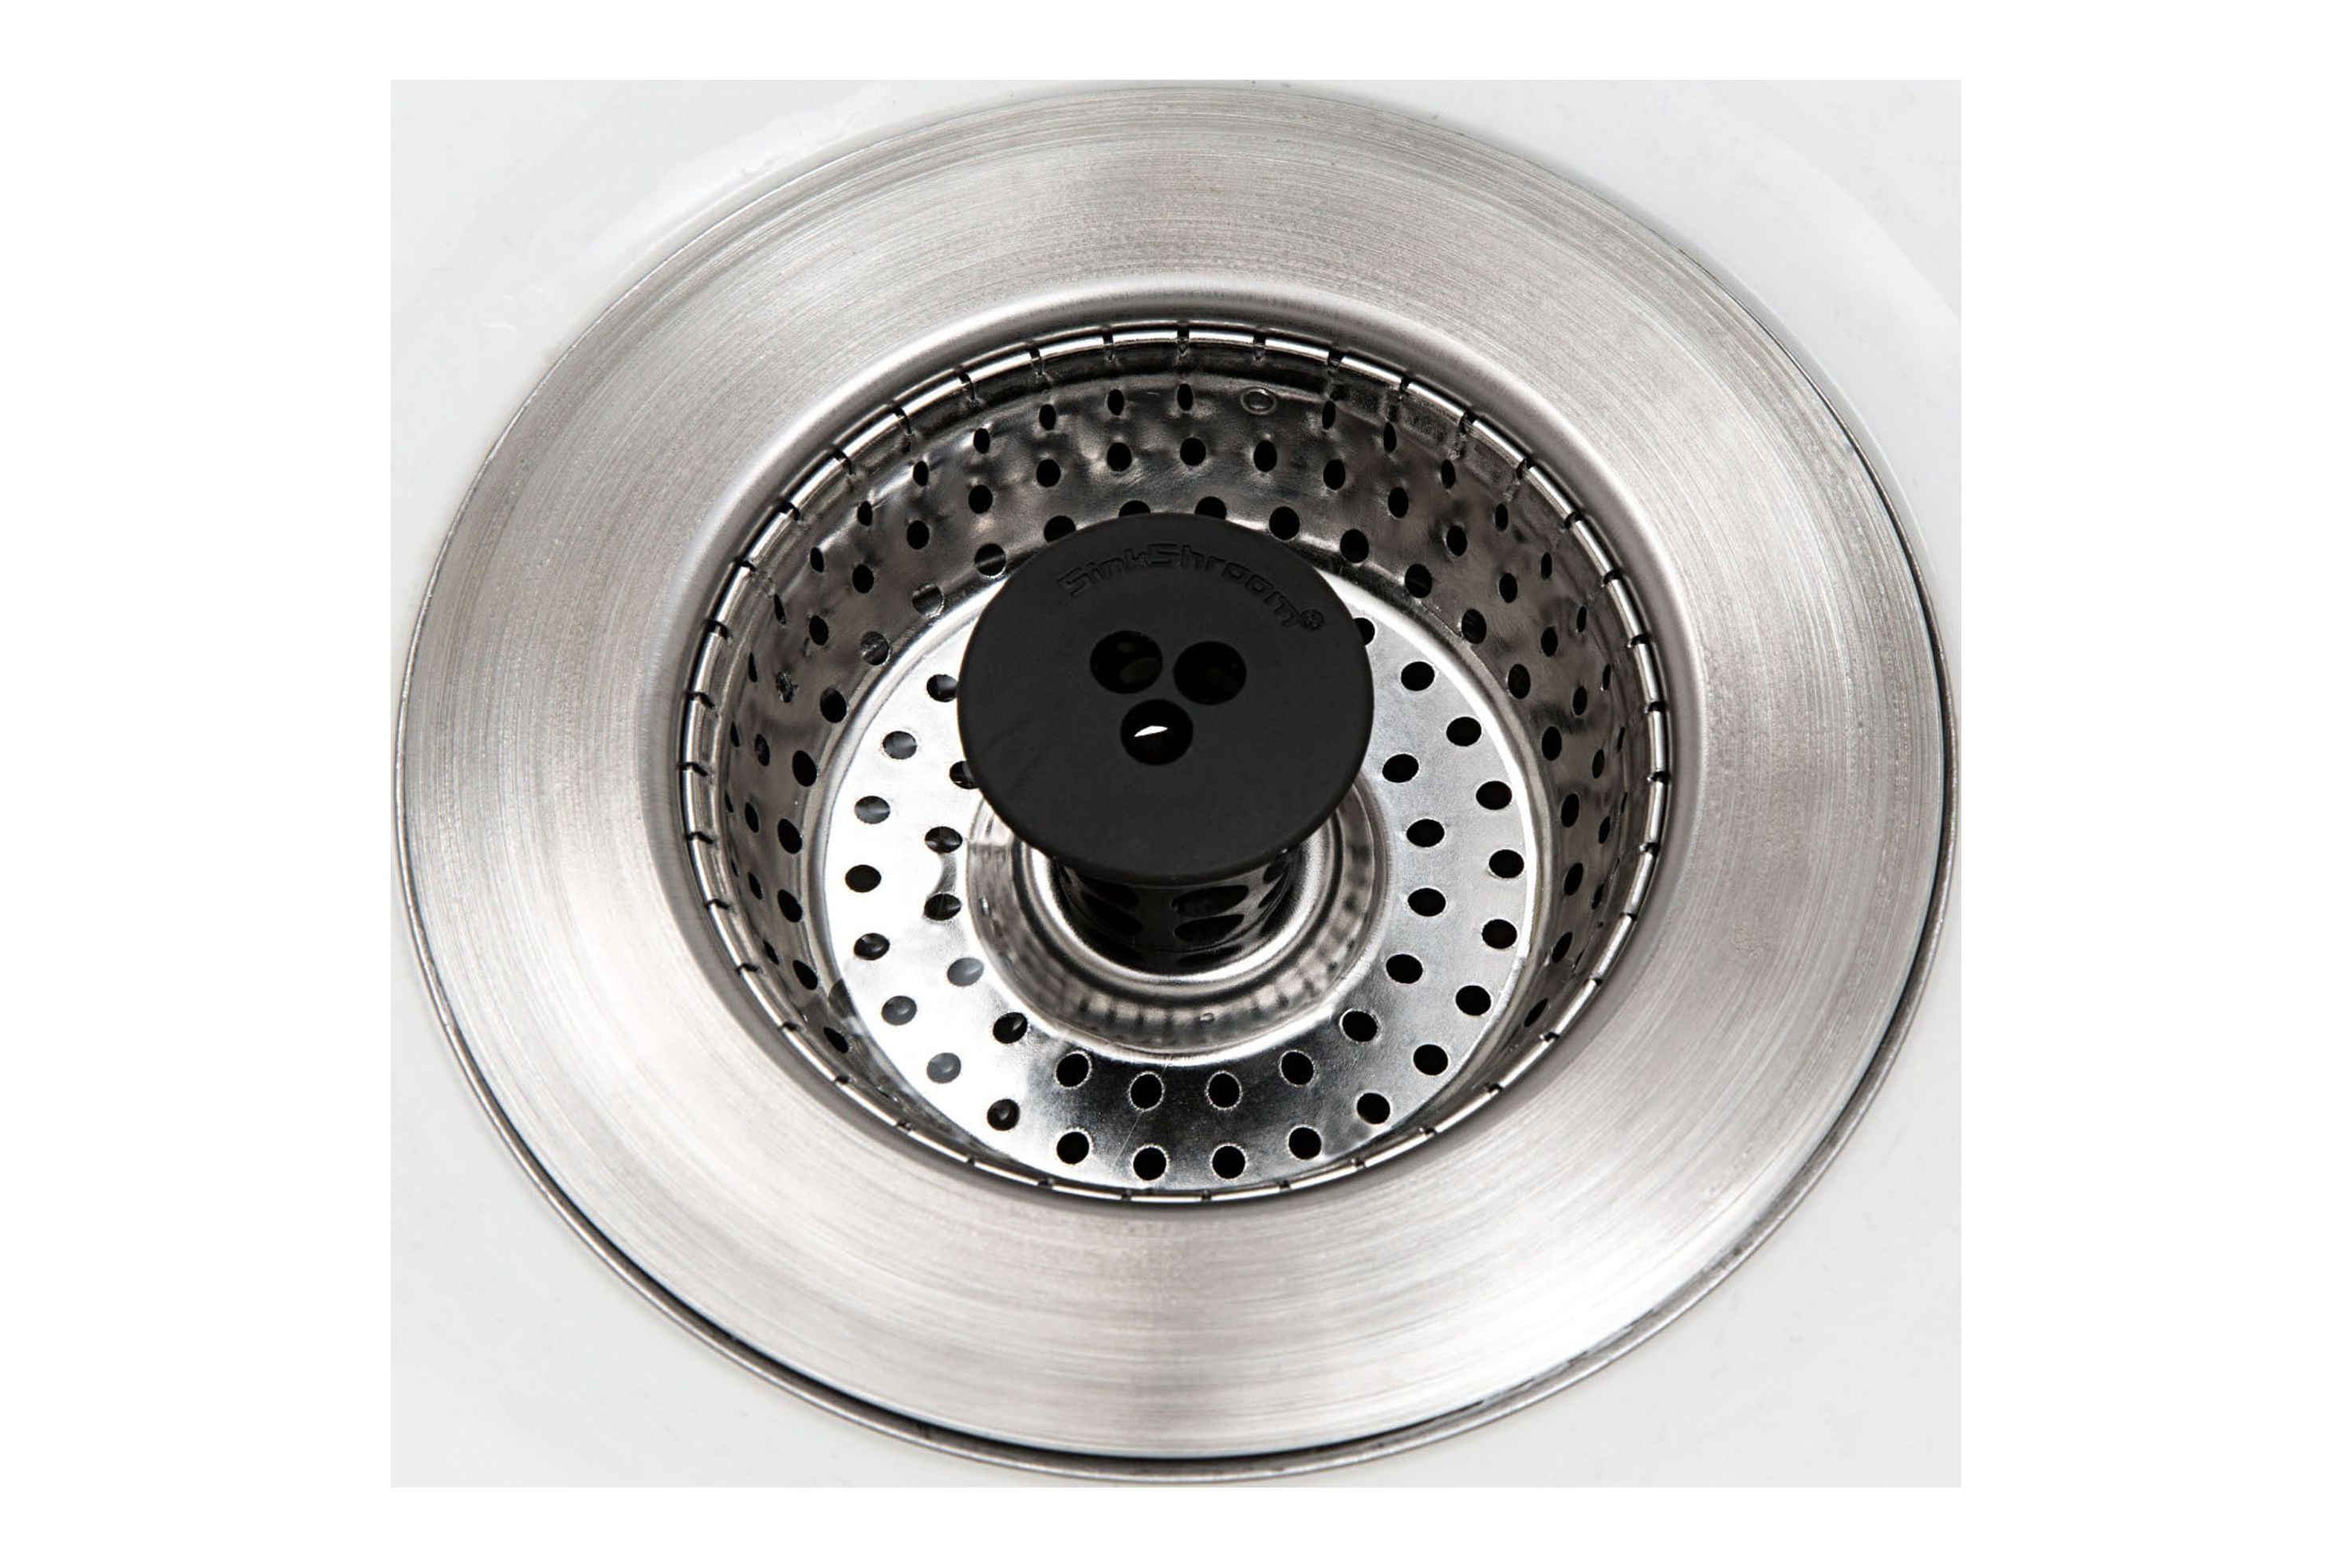 SinkShroom Sink Strainer Review - BB Product Reviews